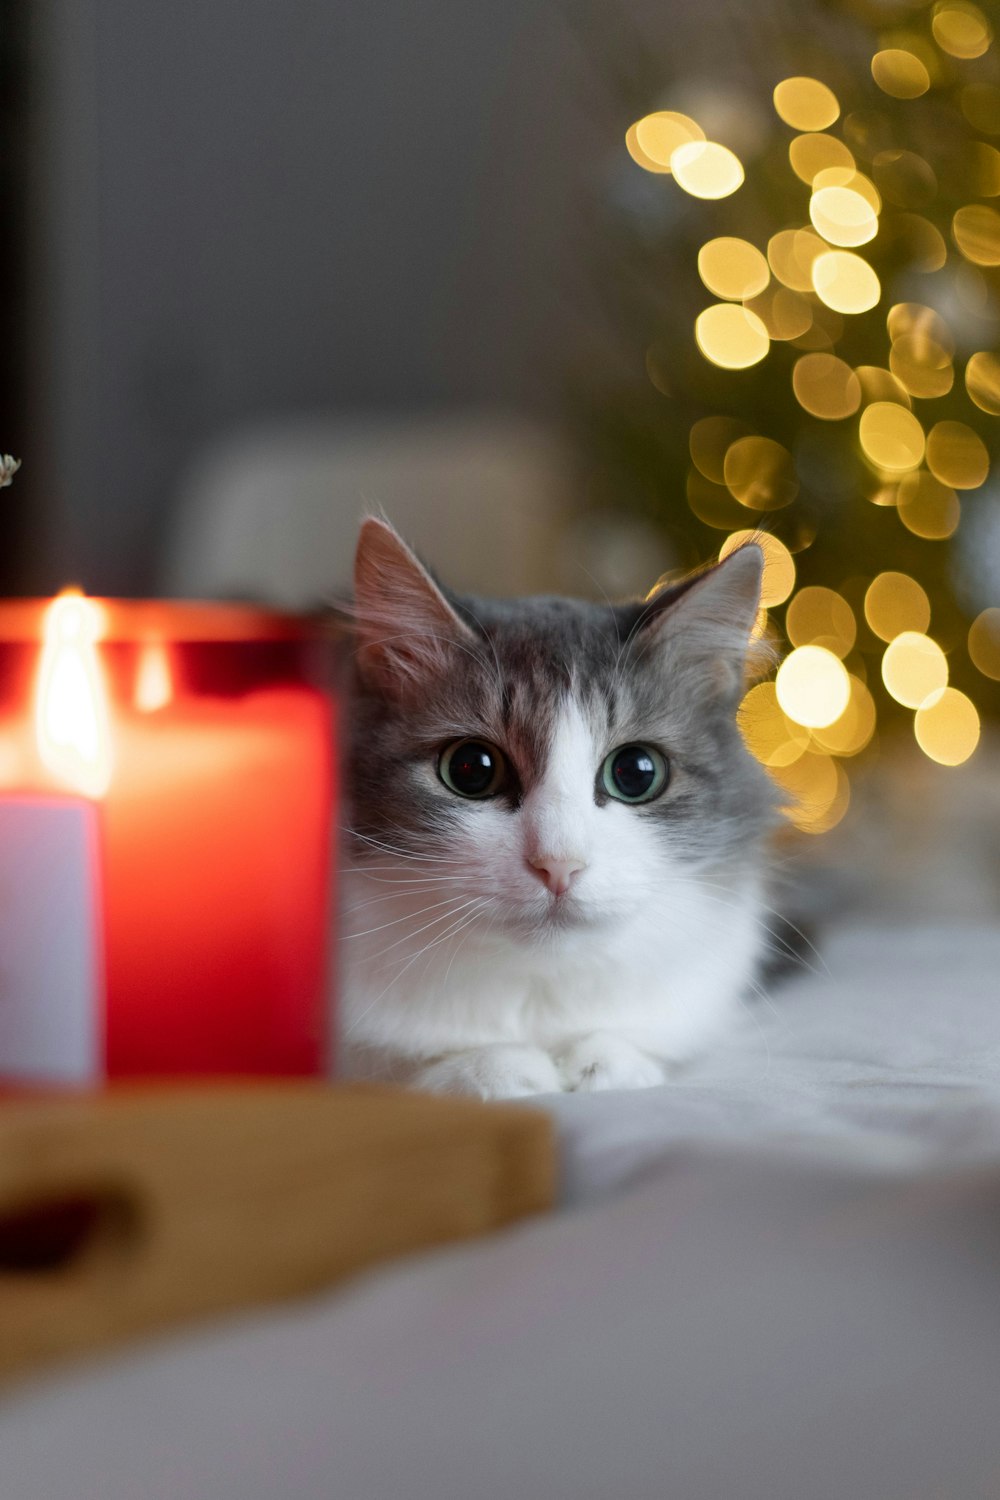 a grey and white cat sitting next to a lit candle